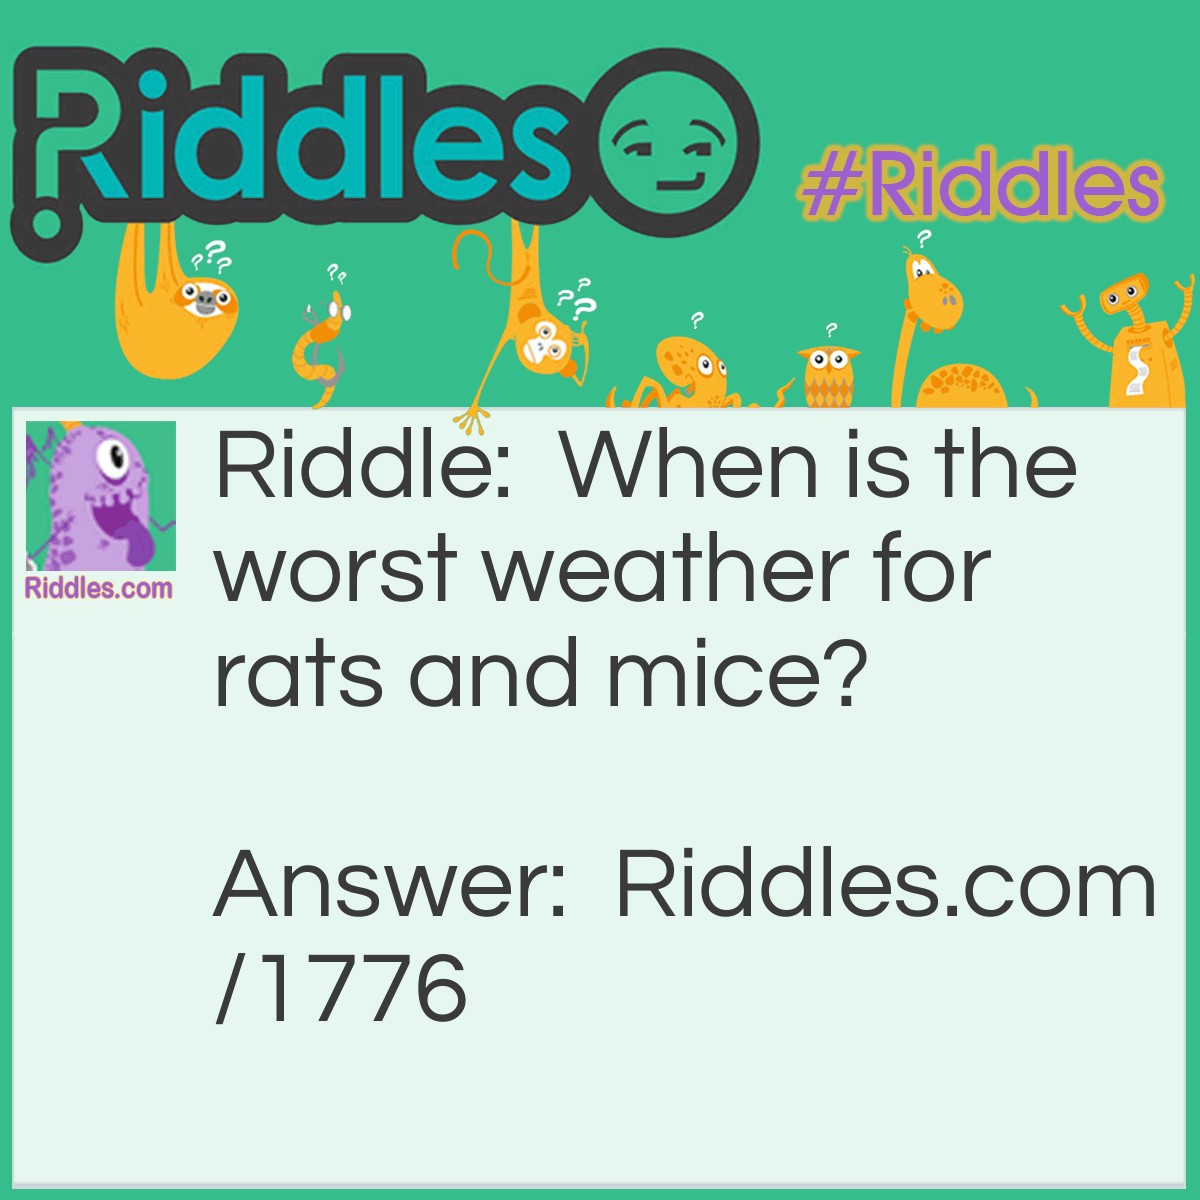 Riddle: When is the worst weather for rats and mice? Answer: When it rains cats and dogs.